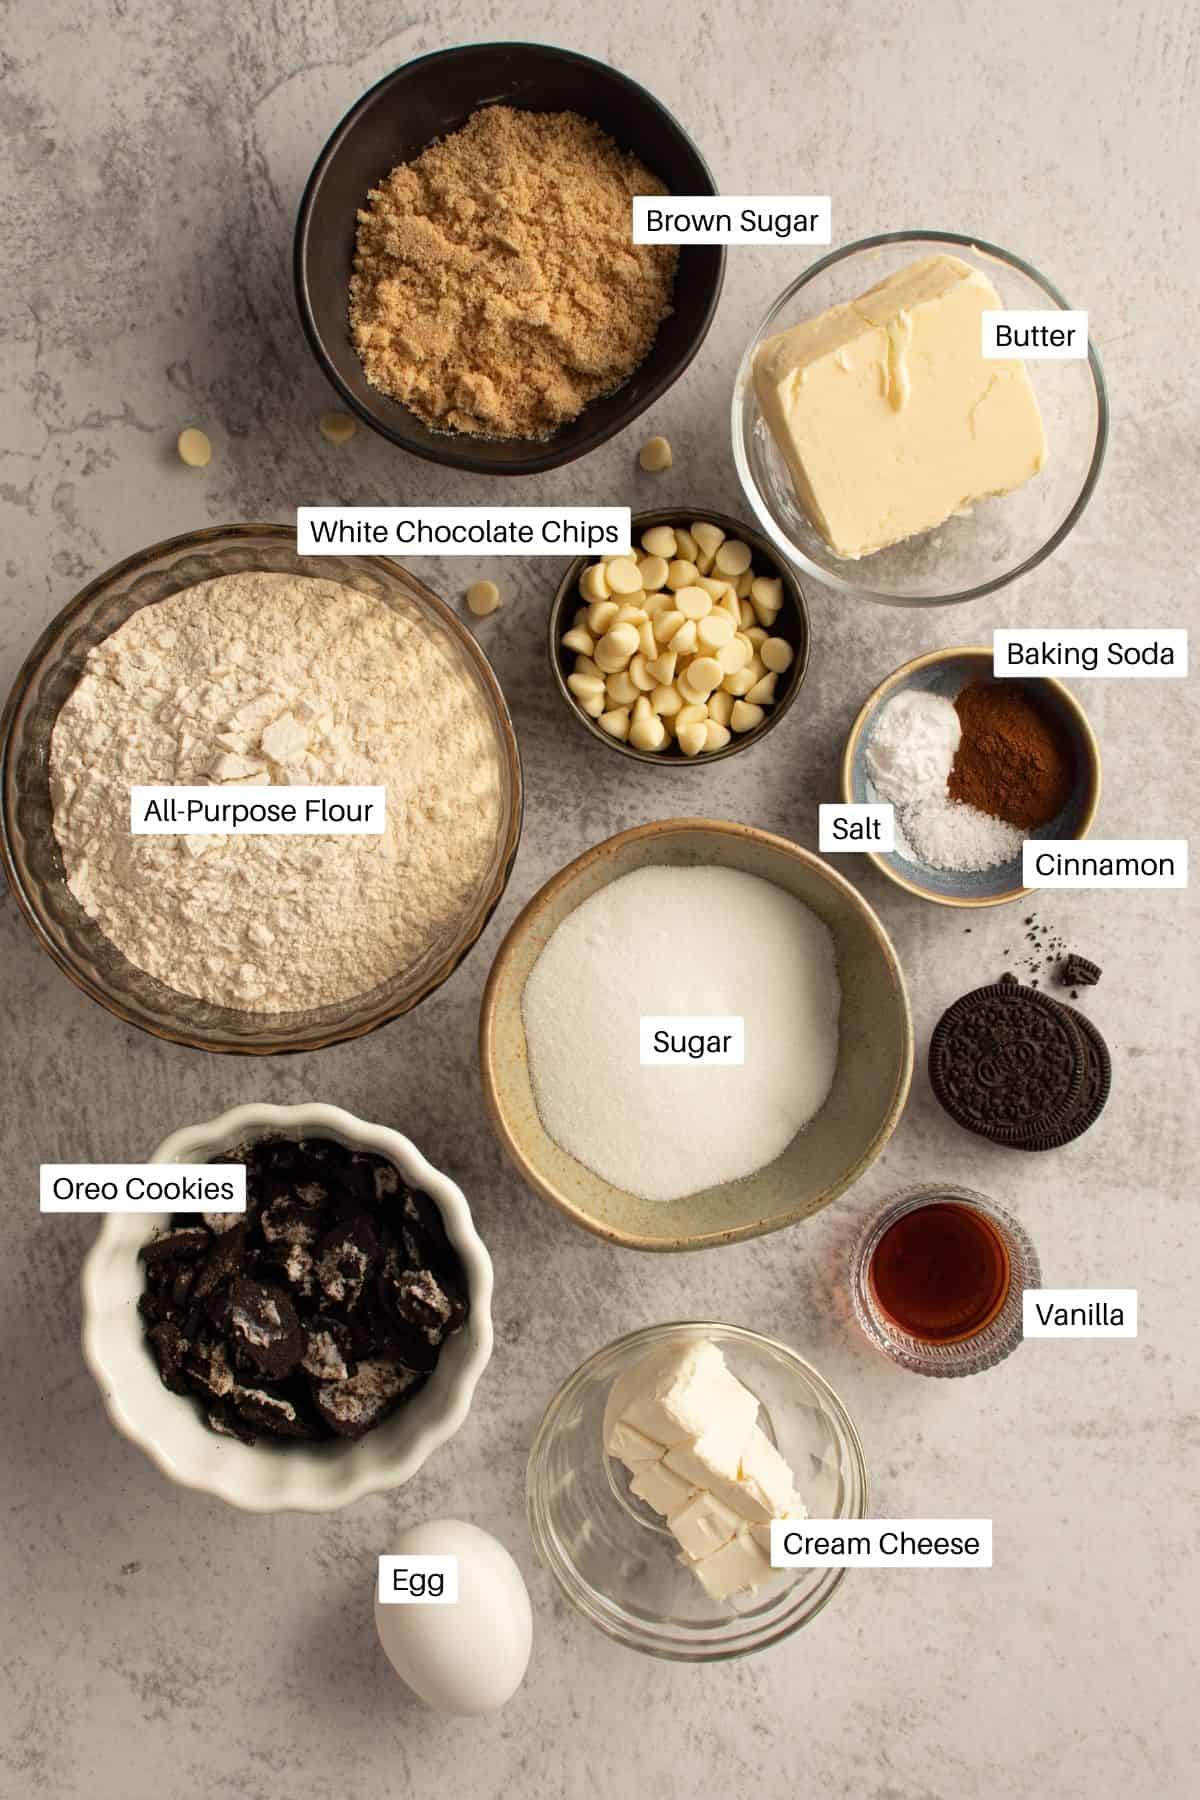 Ingredients for cookies laid out including flour, Oreos, and cinnamon.